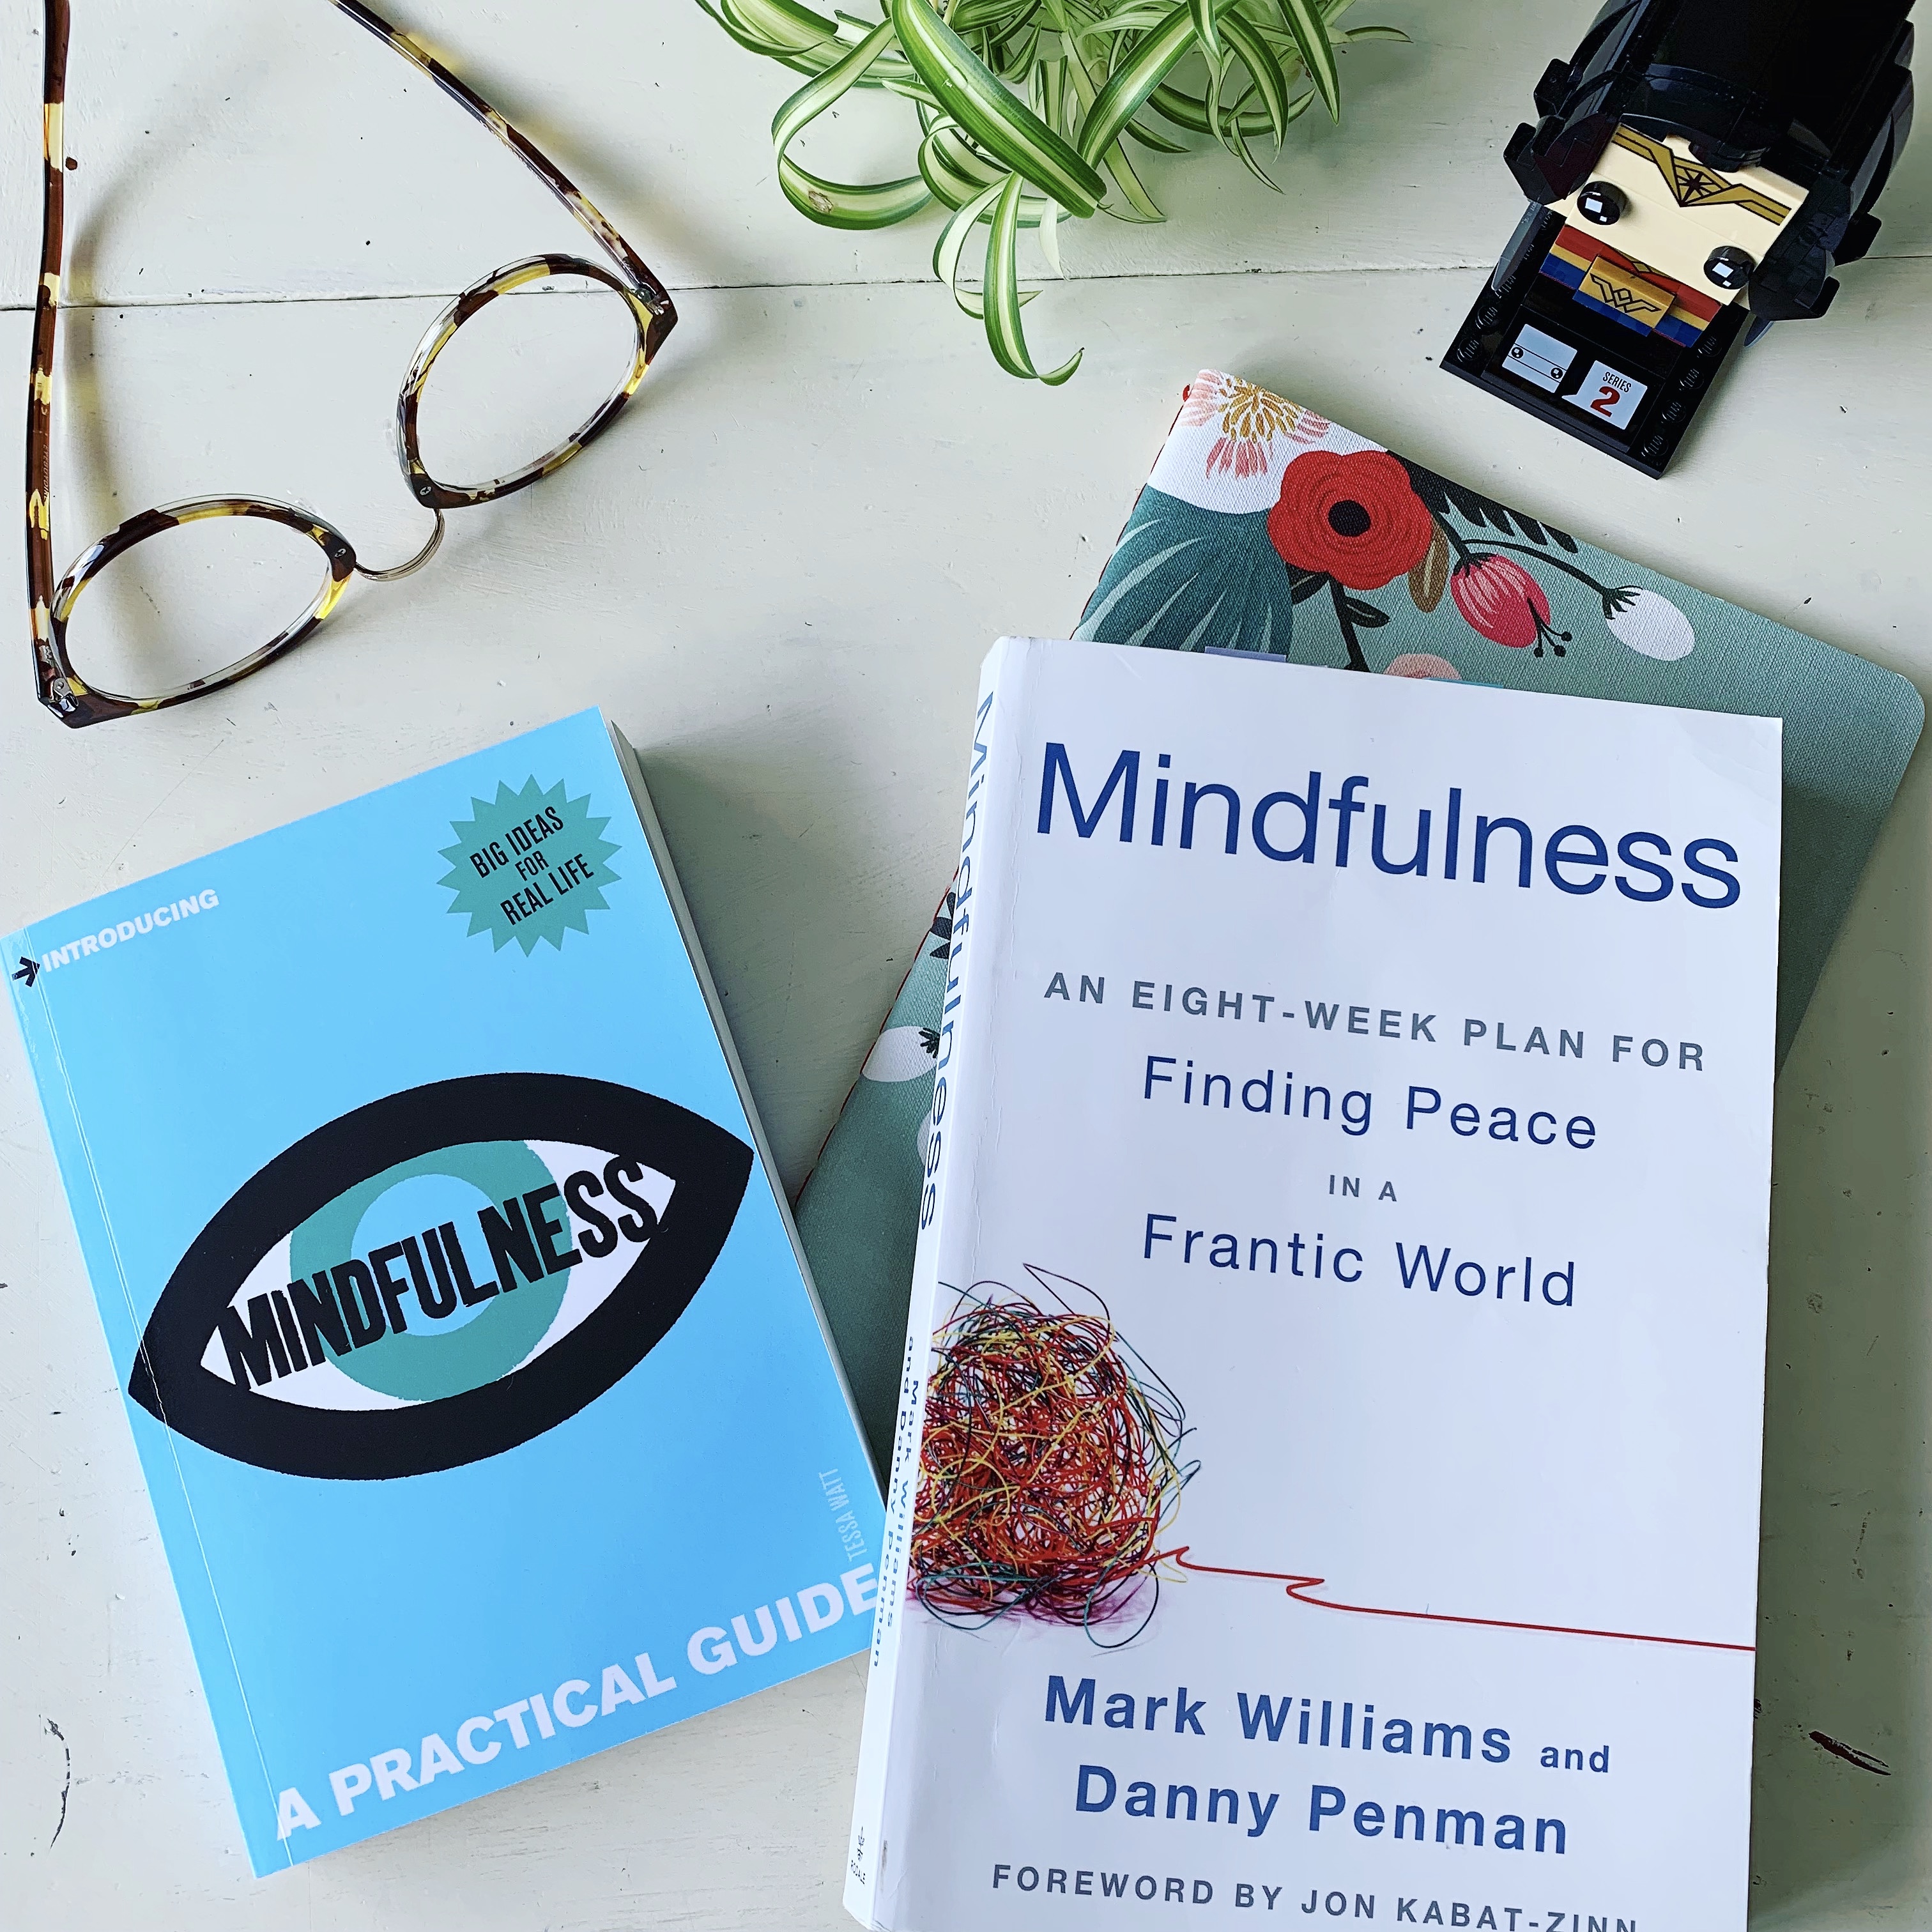 Photo of mindfulness books on table